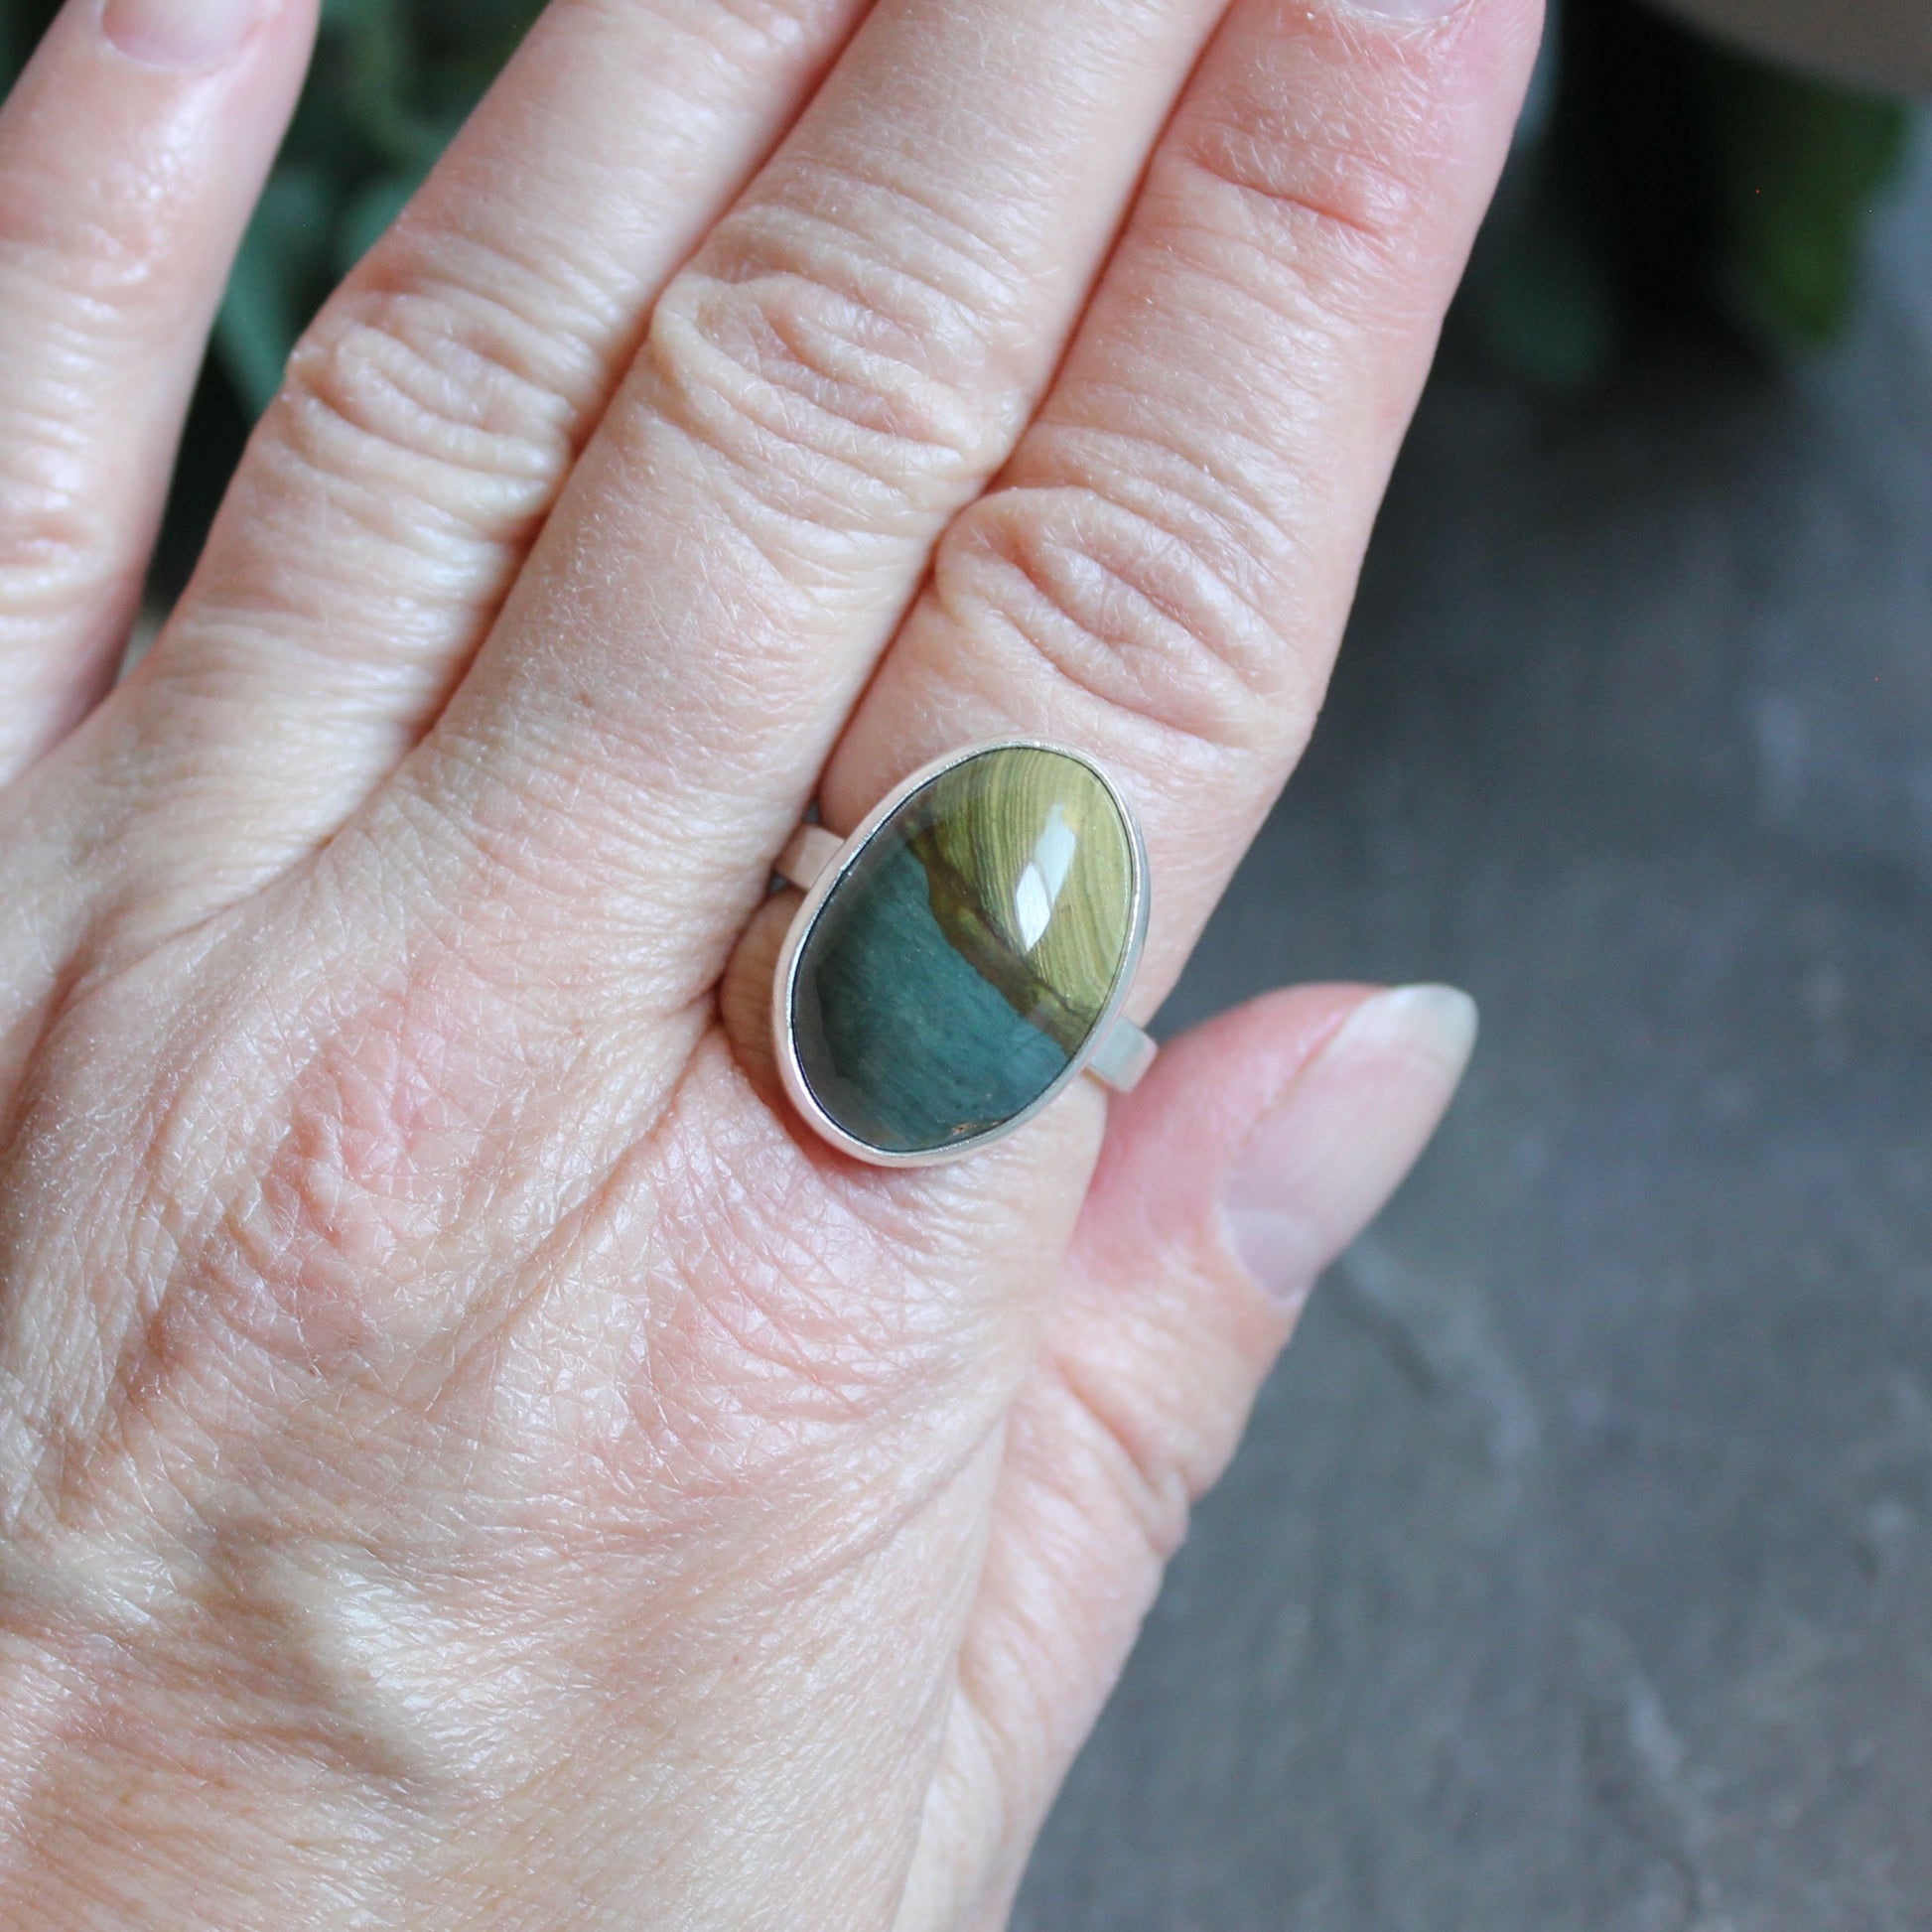 a green and brown oval Gary Green Jasper or Petrified bogwood cabochon set in a fine and sterling silver setting on a sturdy silver band.